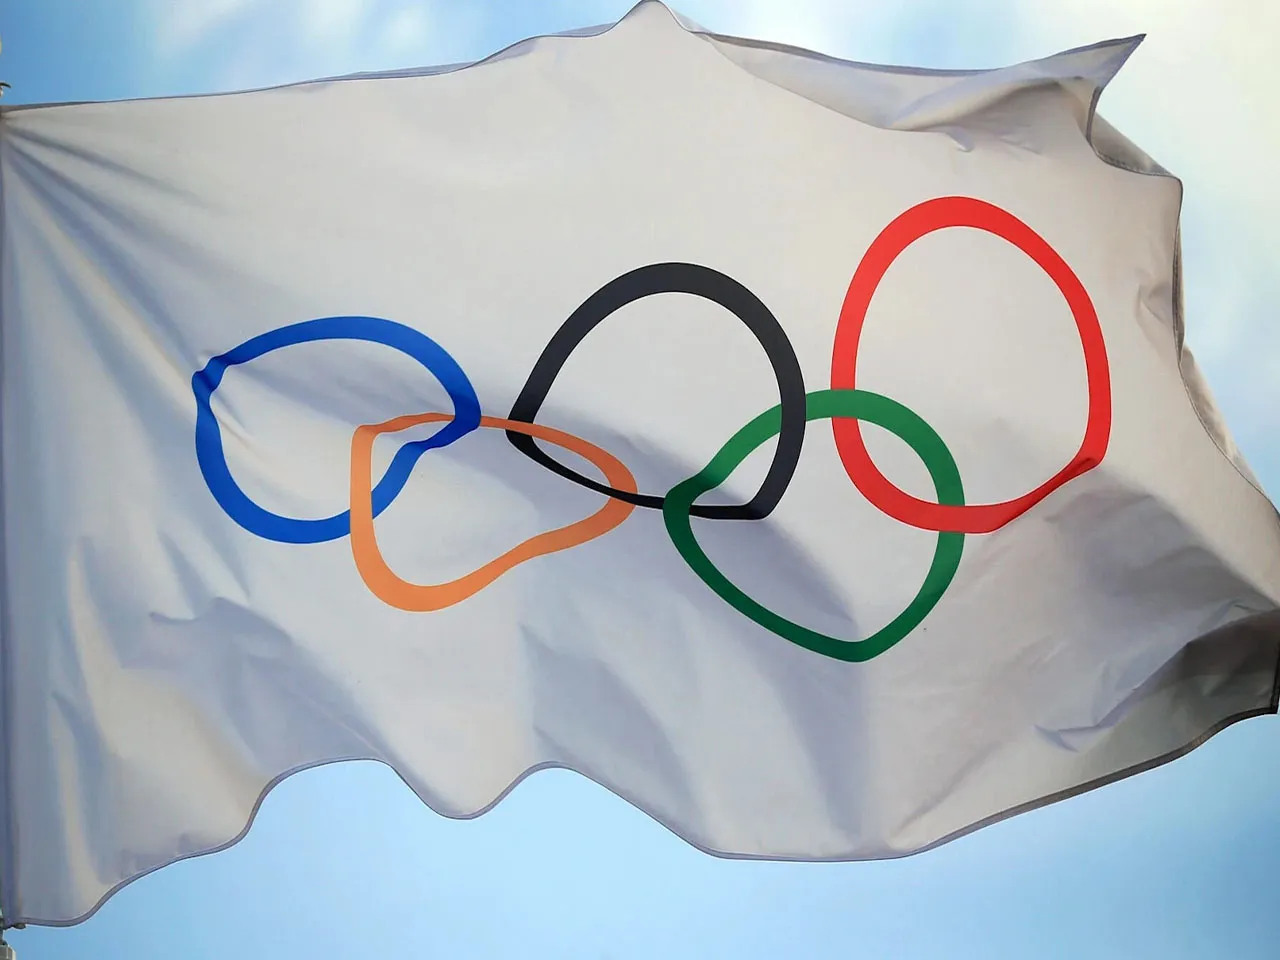 Neutral athletes will not participate in the opening of the 2024 Olympic Games